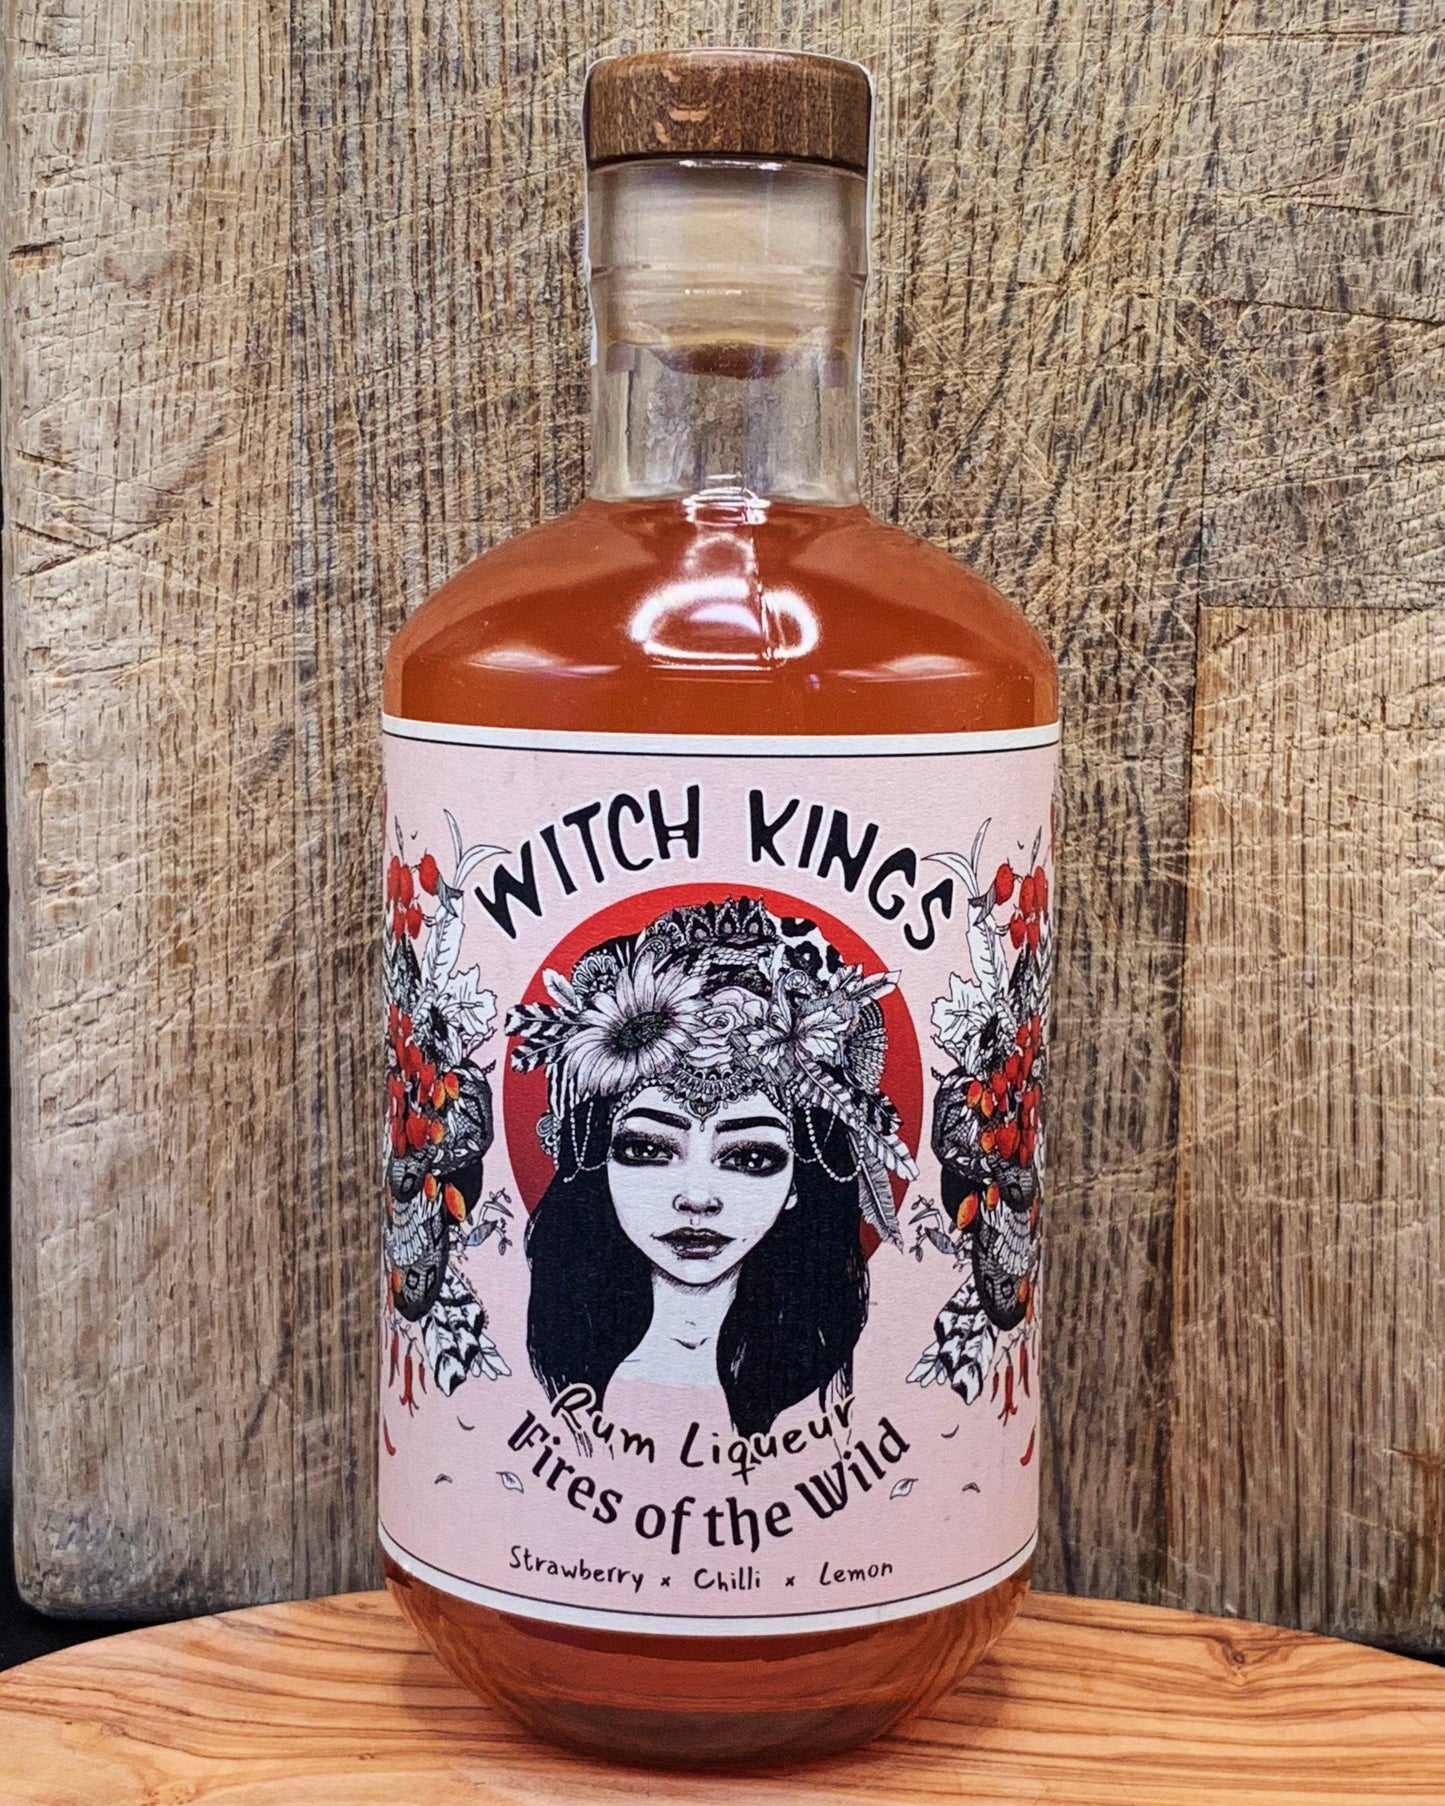 Fires of the Wild - Strawberry, Chilli & Lemon - Witch Kings Rum - Vegan & Gluten-Free - Made in Manchester